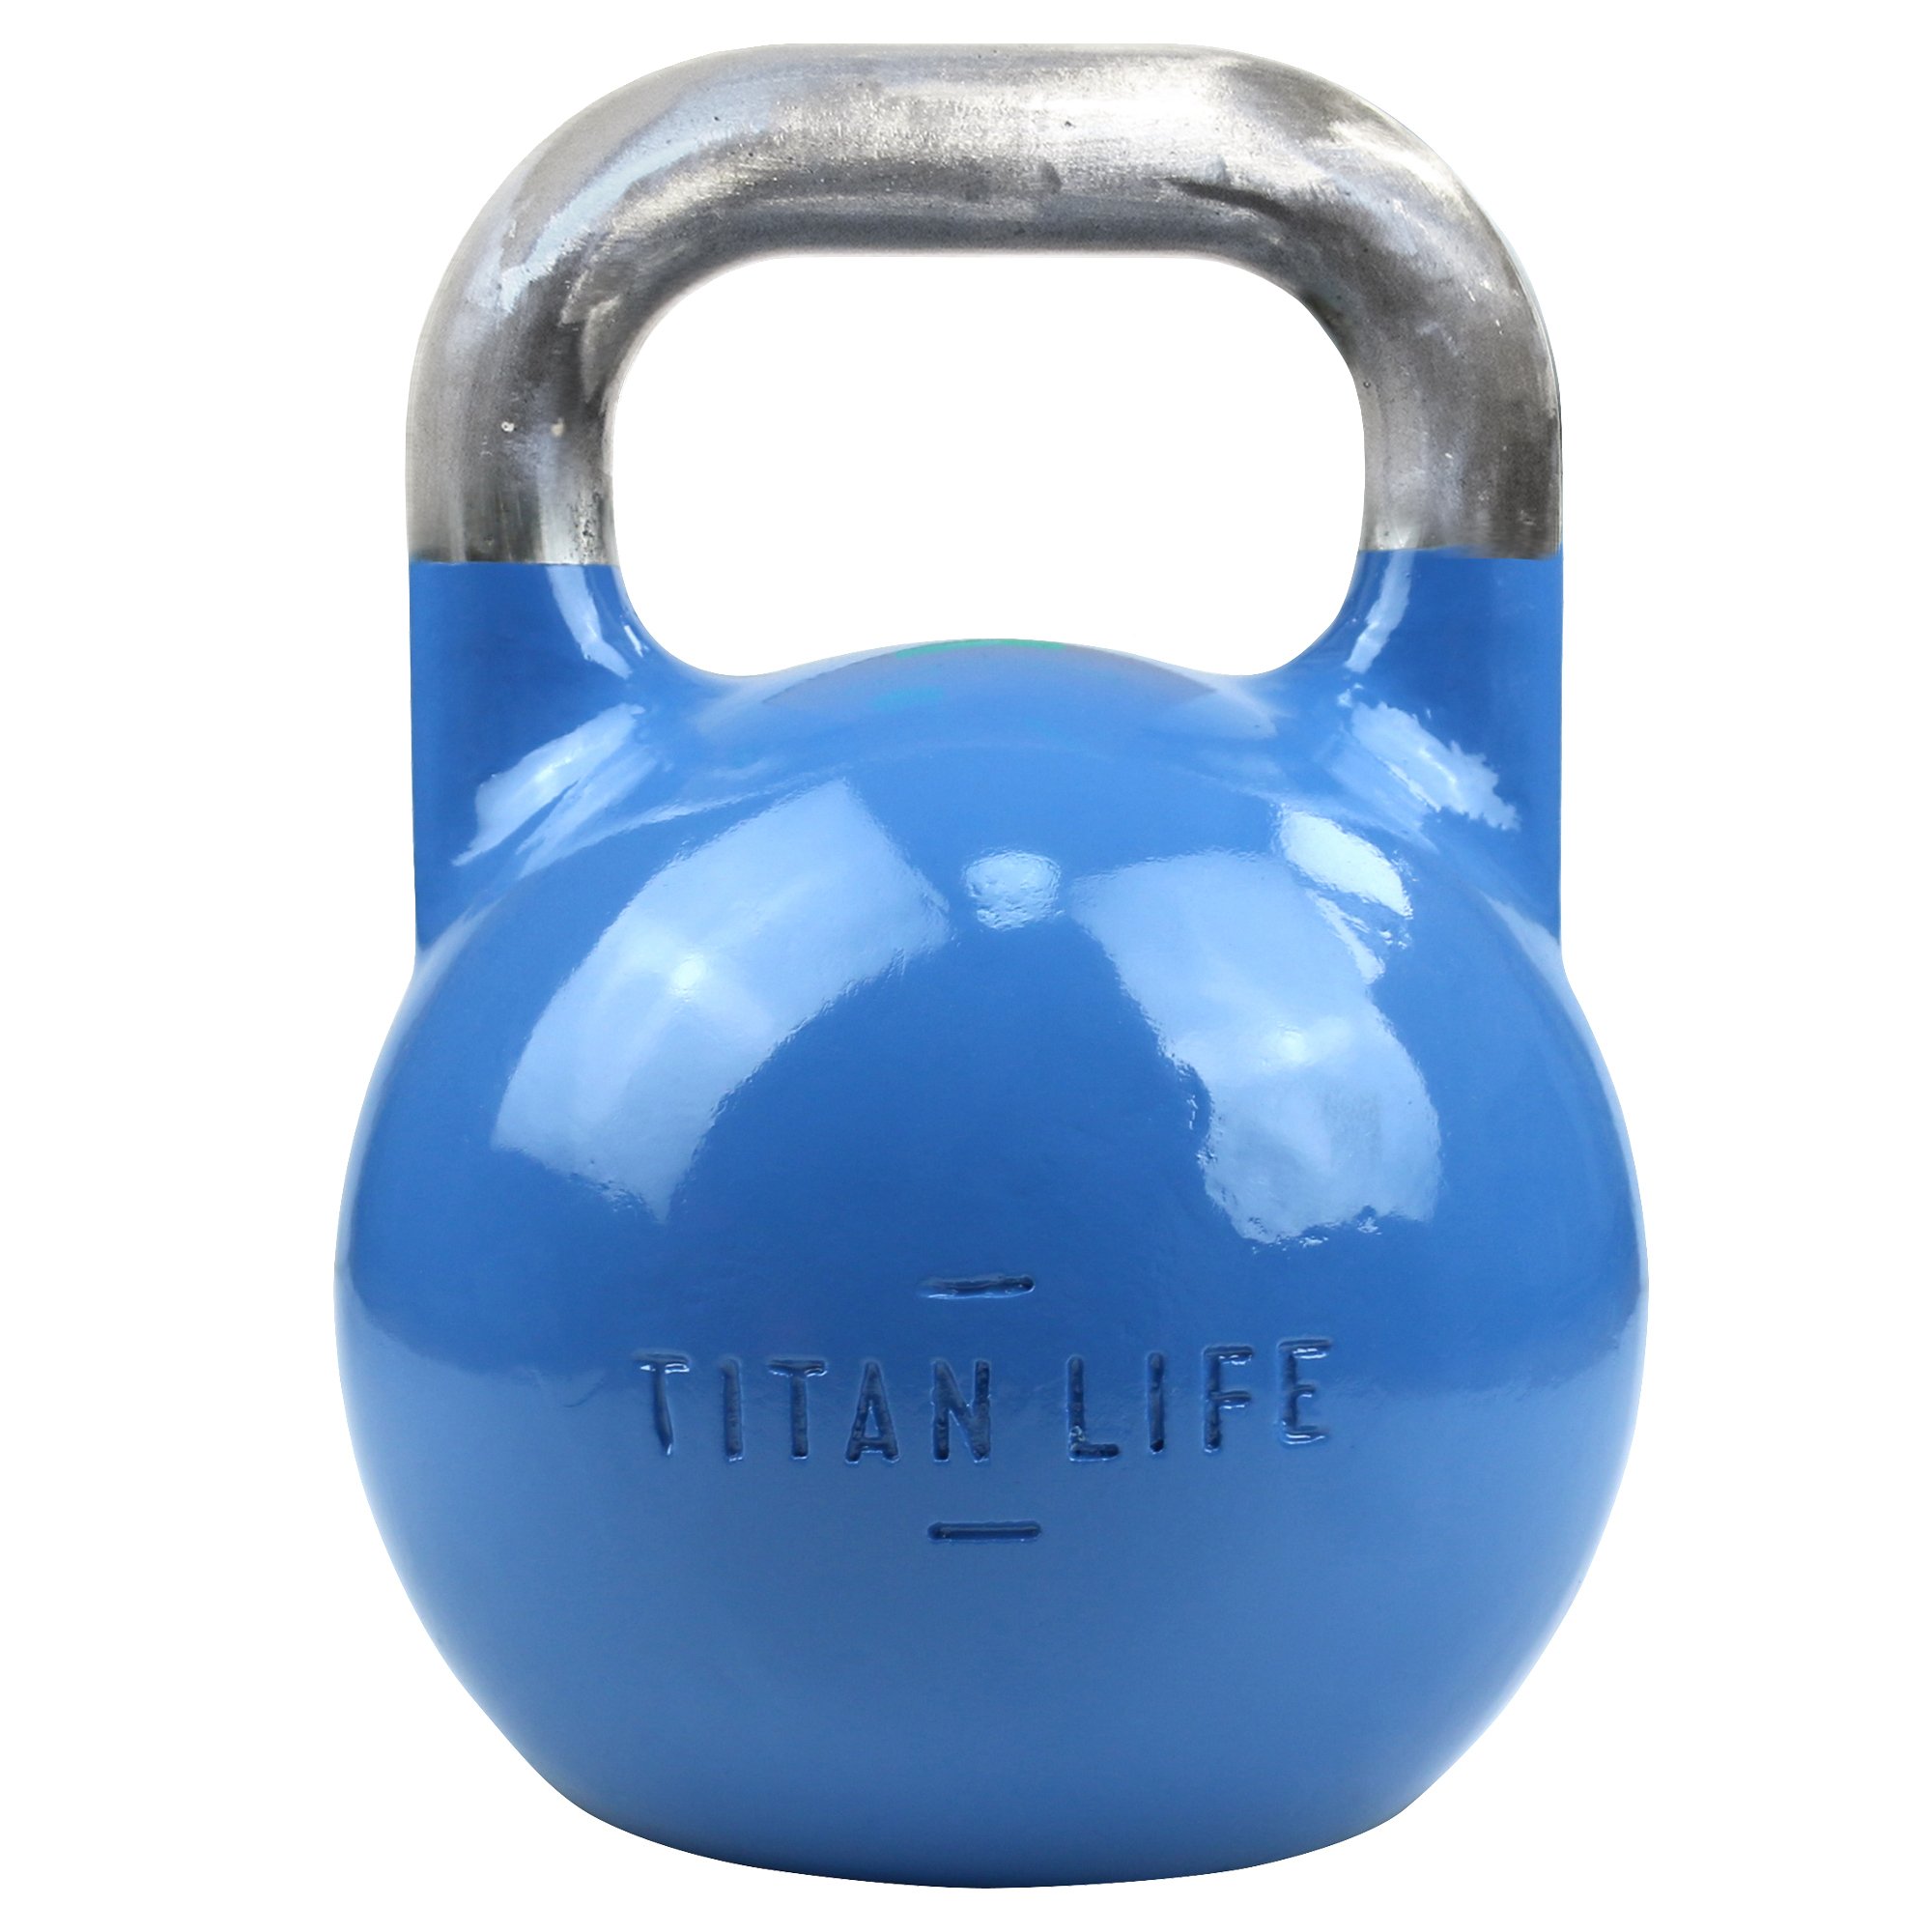 TITAN LIFE PRO Kettlebell Steel Competition 12 Kg.